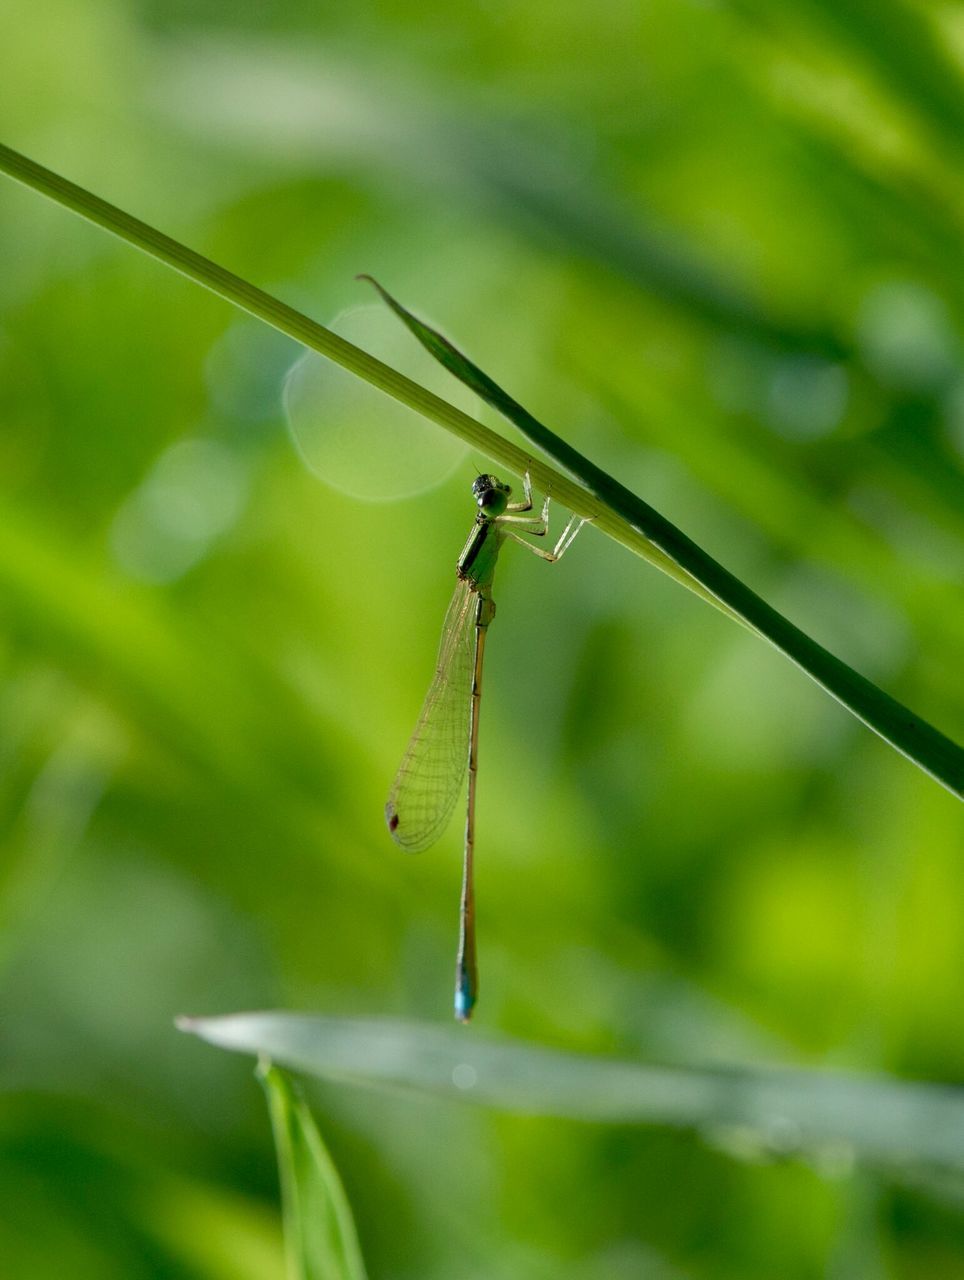 one animal, animal themes, insect, animals in the wild, wildlife, dragonfly, focus on foreground, close-up, selective focus, green color, twig, nature, day, outdoors, full length, plant, leaf, no people, spider, blade of grass